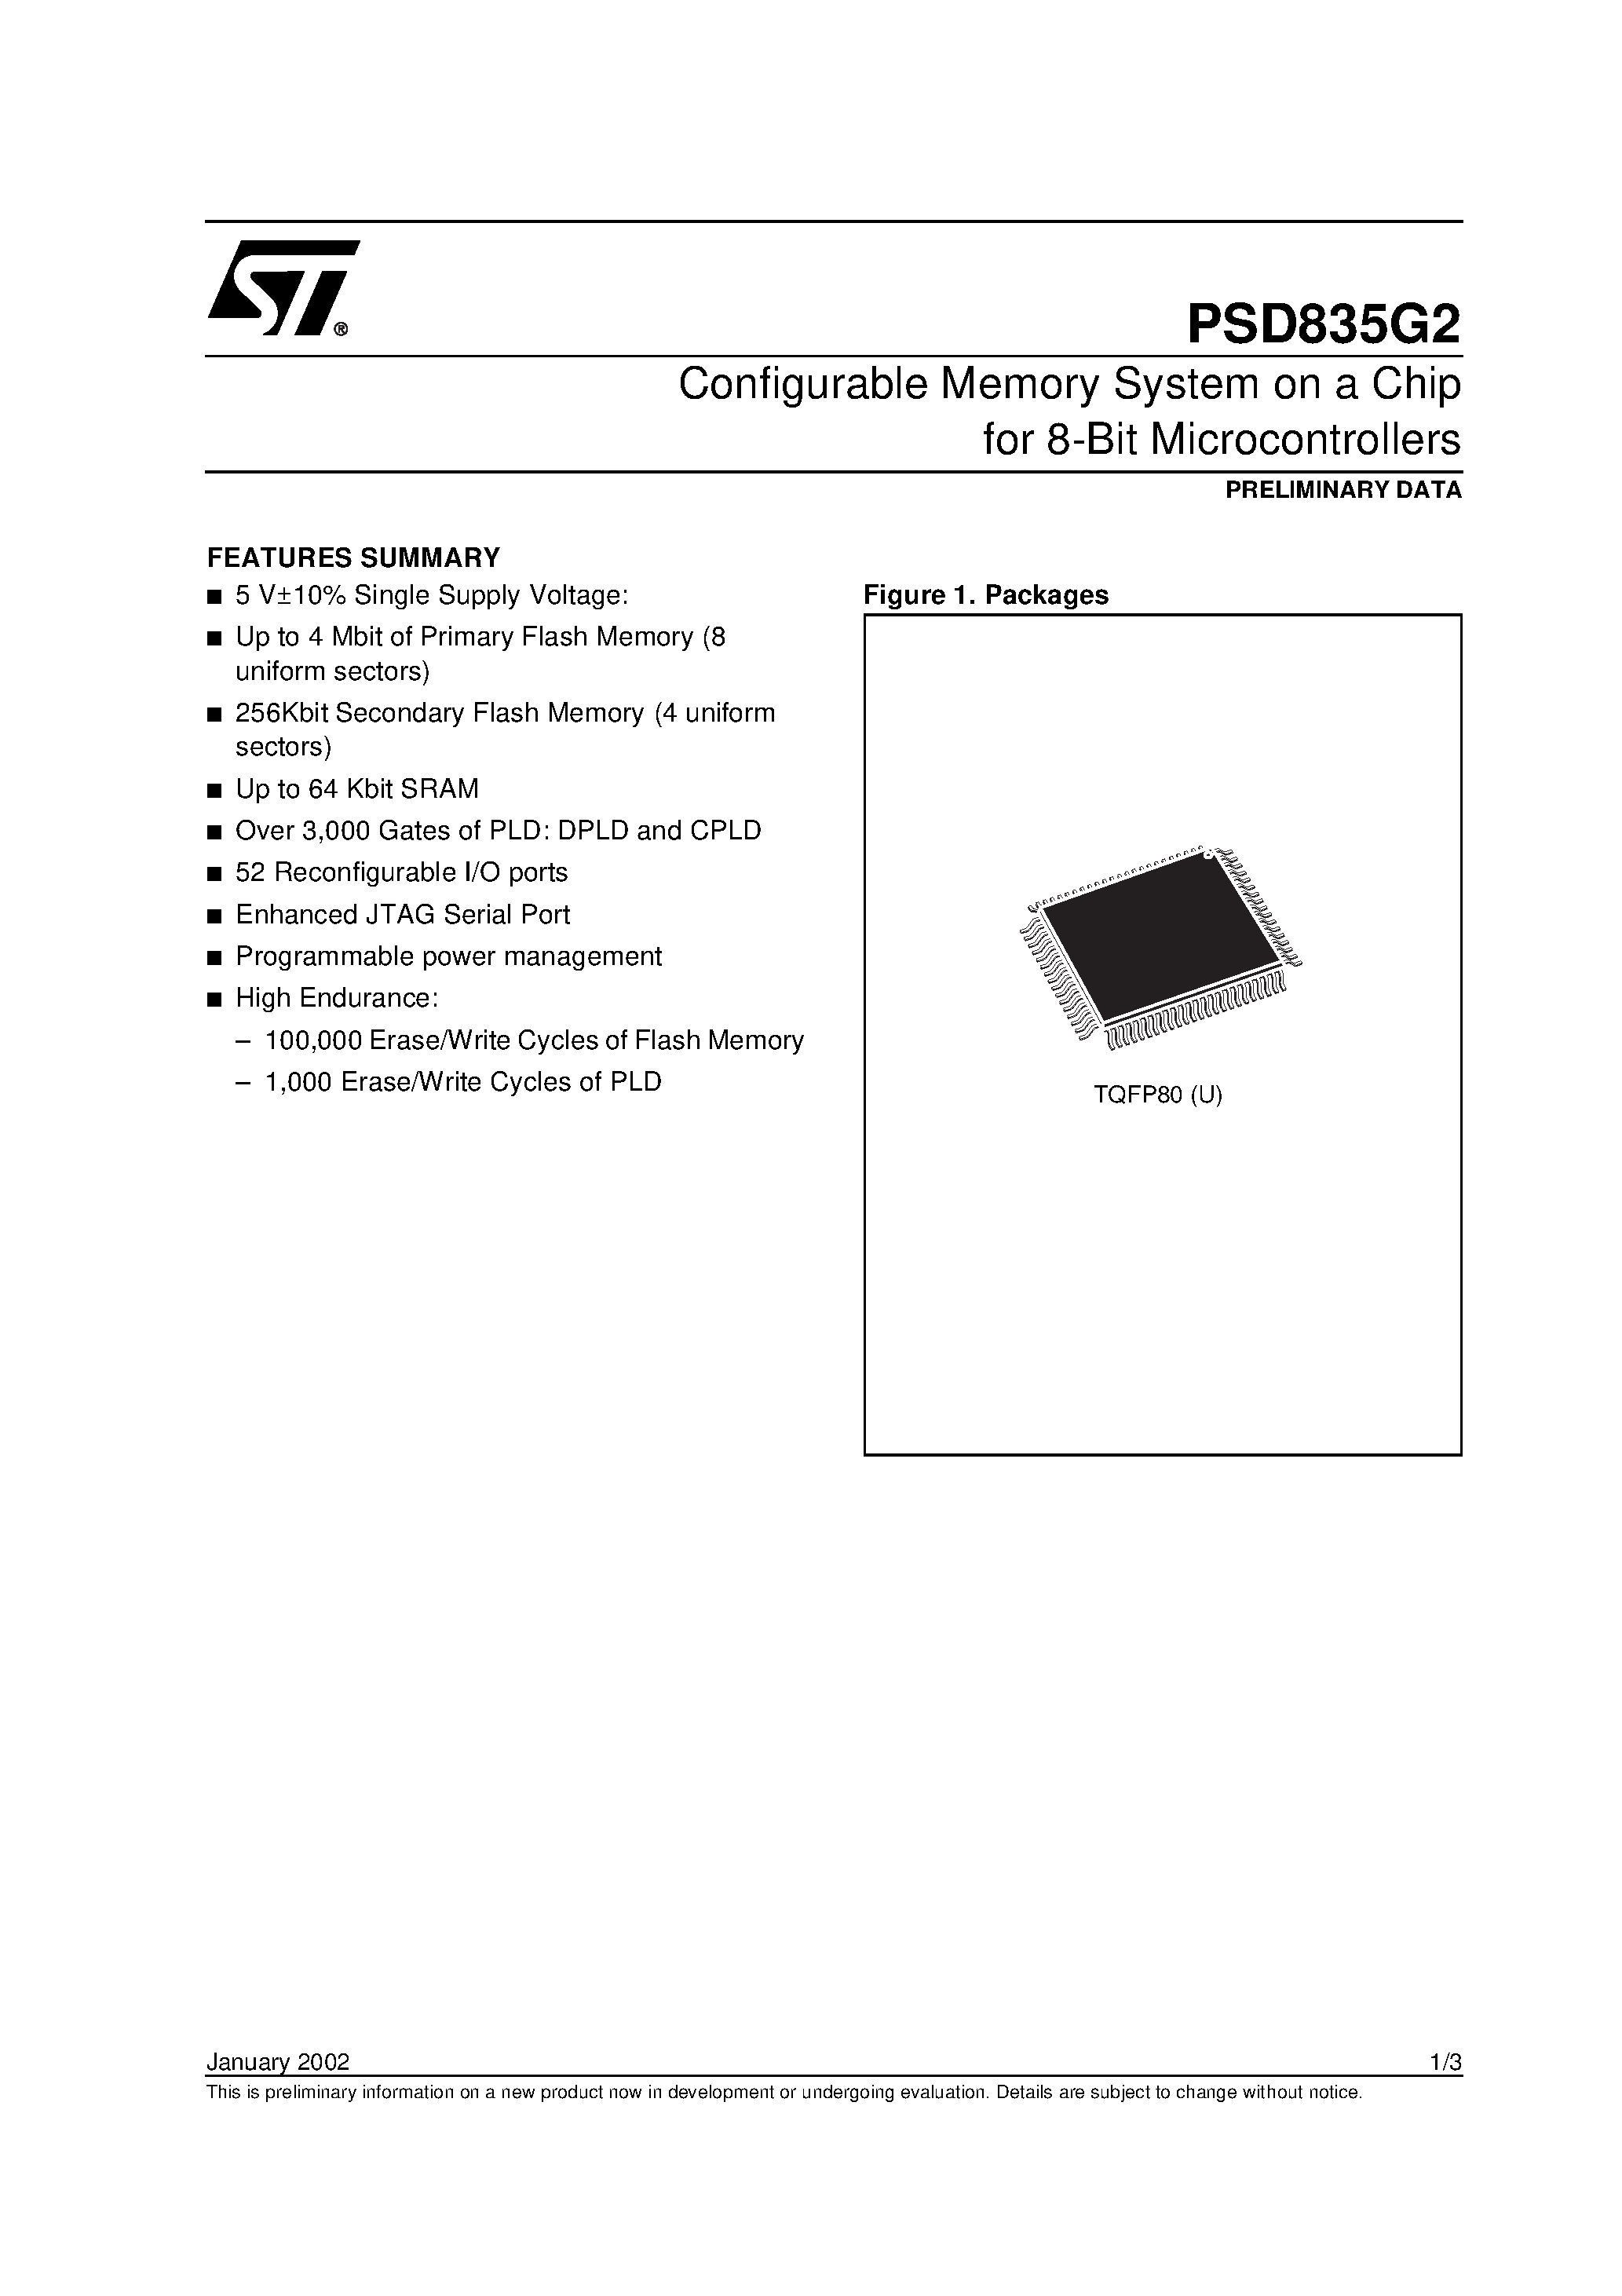 Datasheet PSD835F2-A-90B81 - Configurable Memory System on a Chip for 8-Bit Microcontrollers page 1